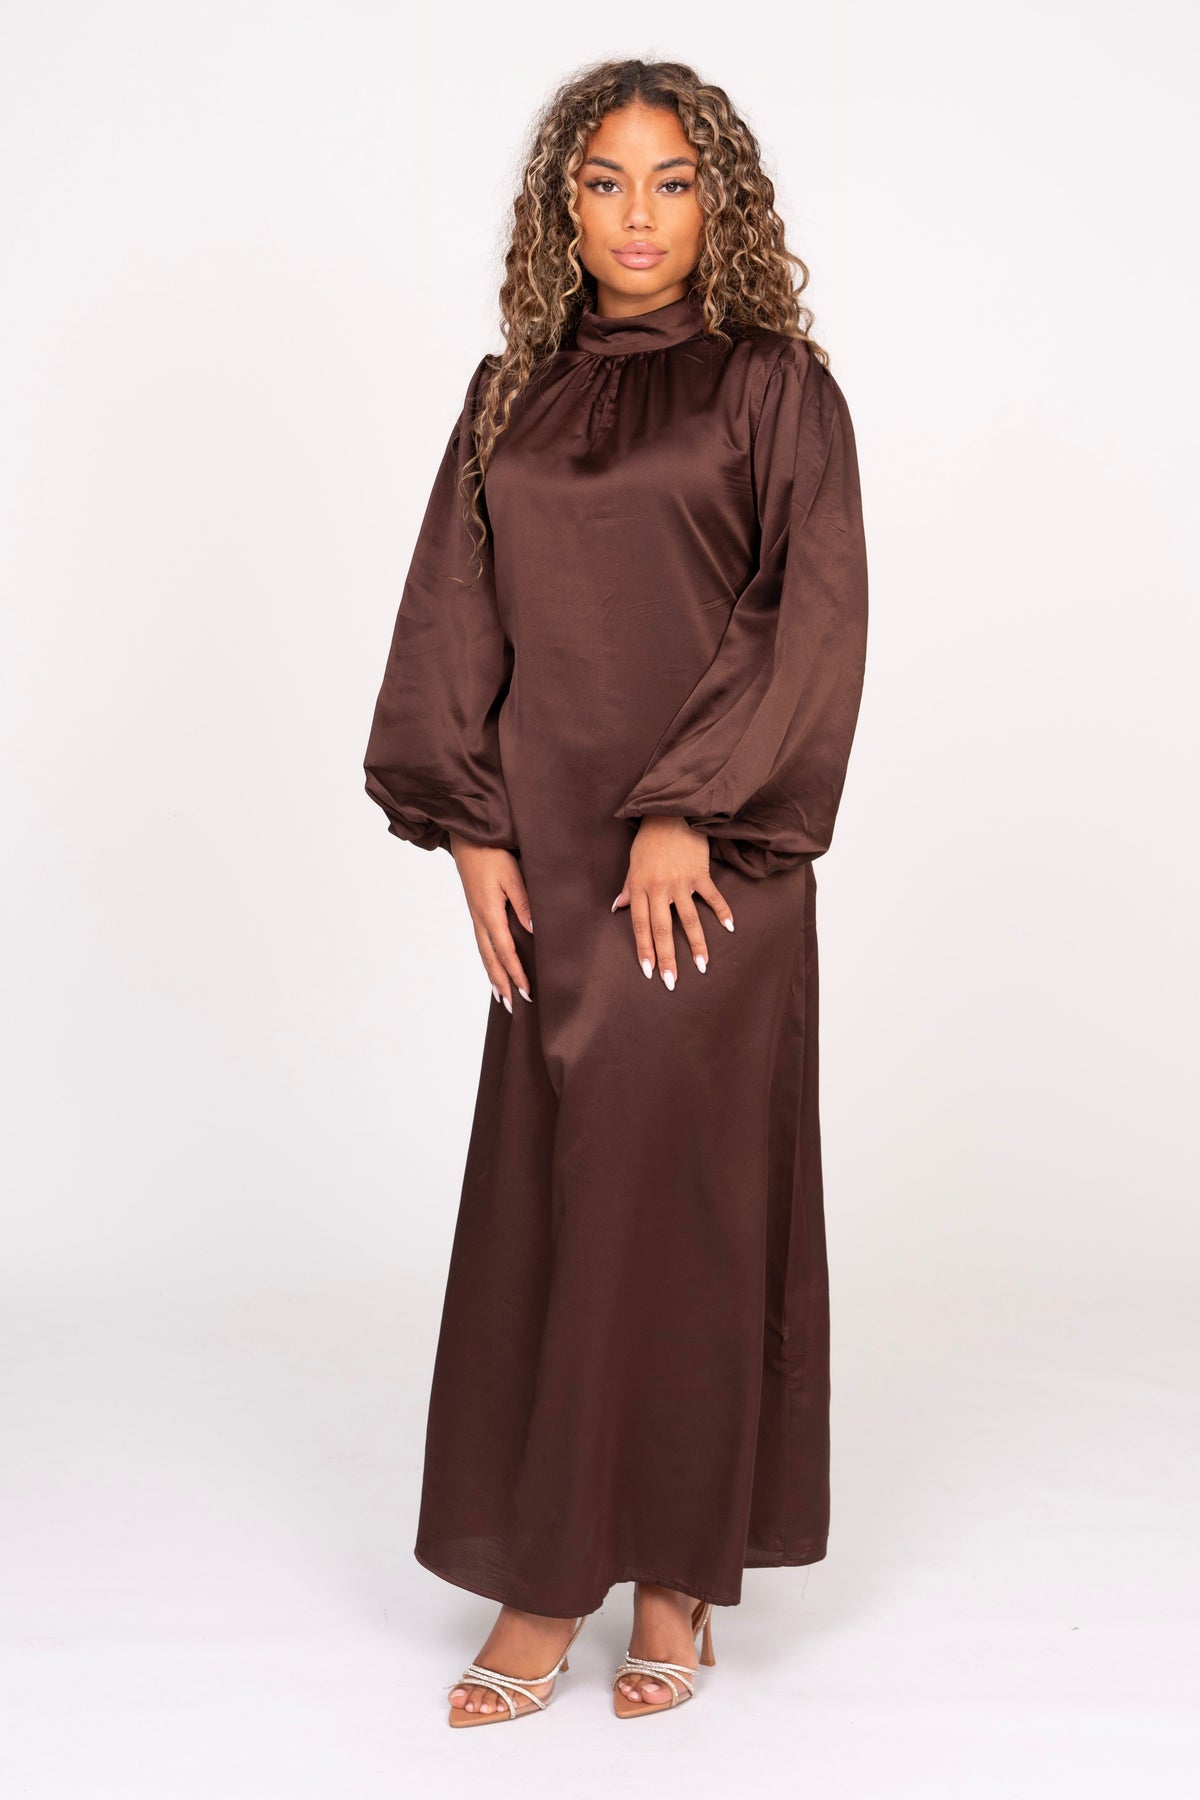 Brown Long Dress With Puffed Sleeves